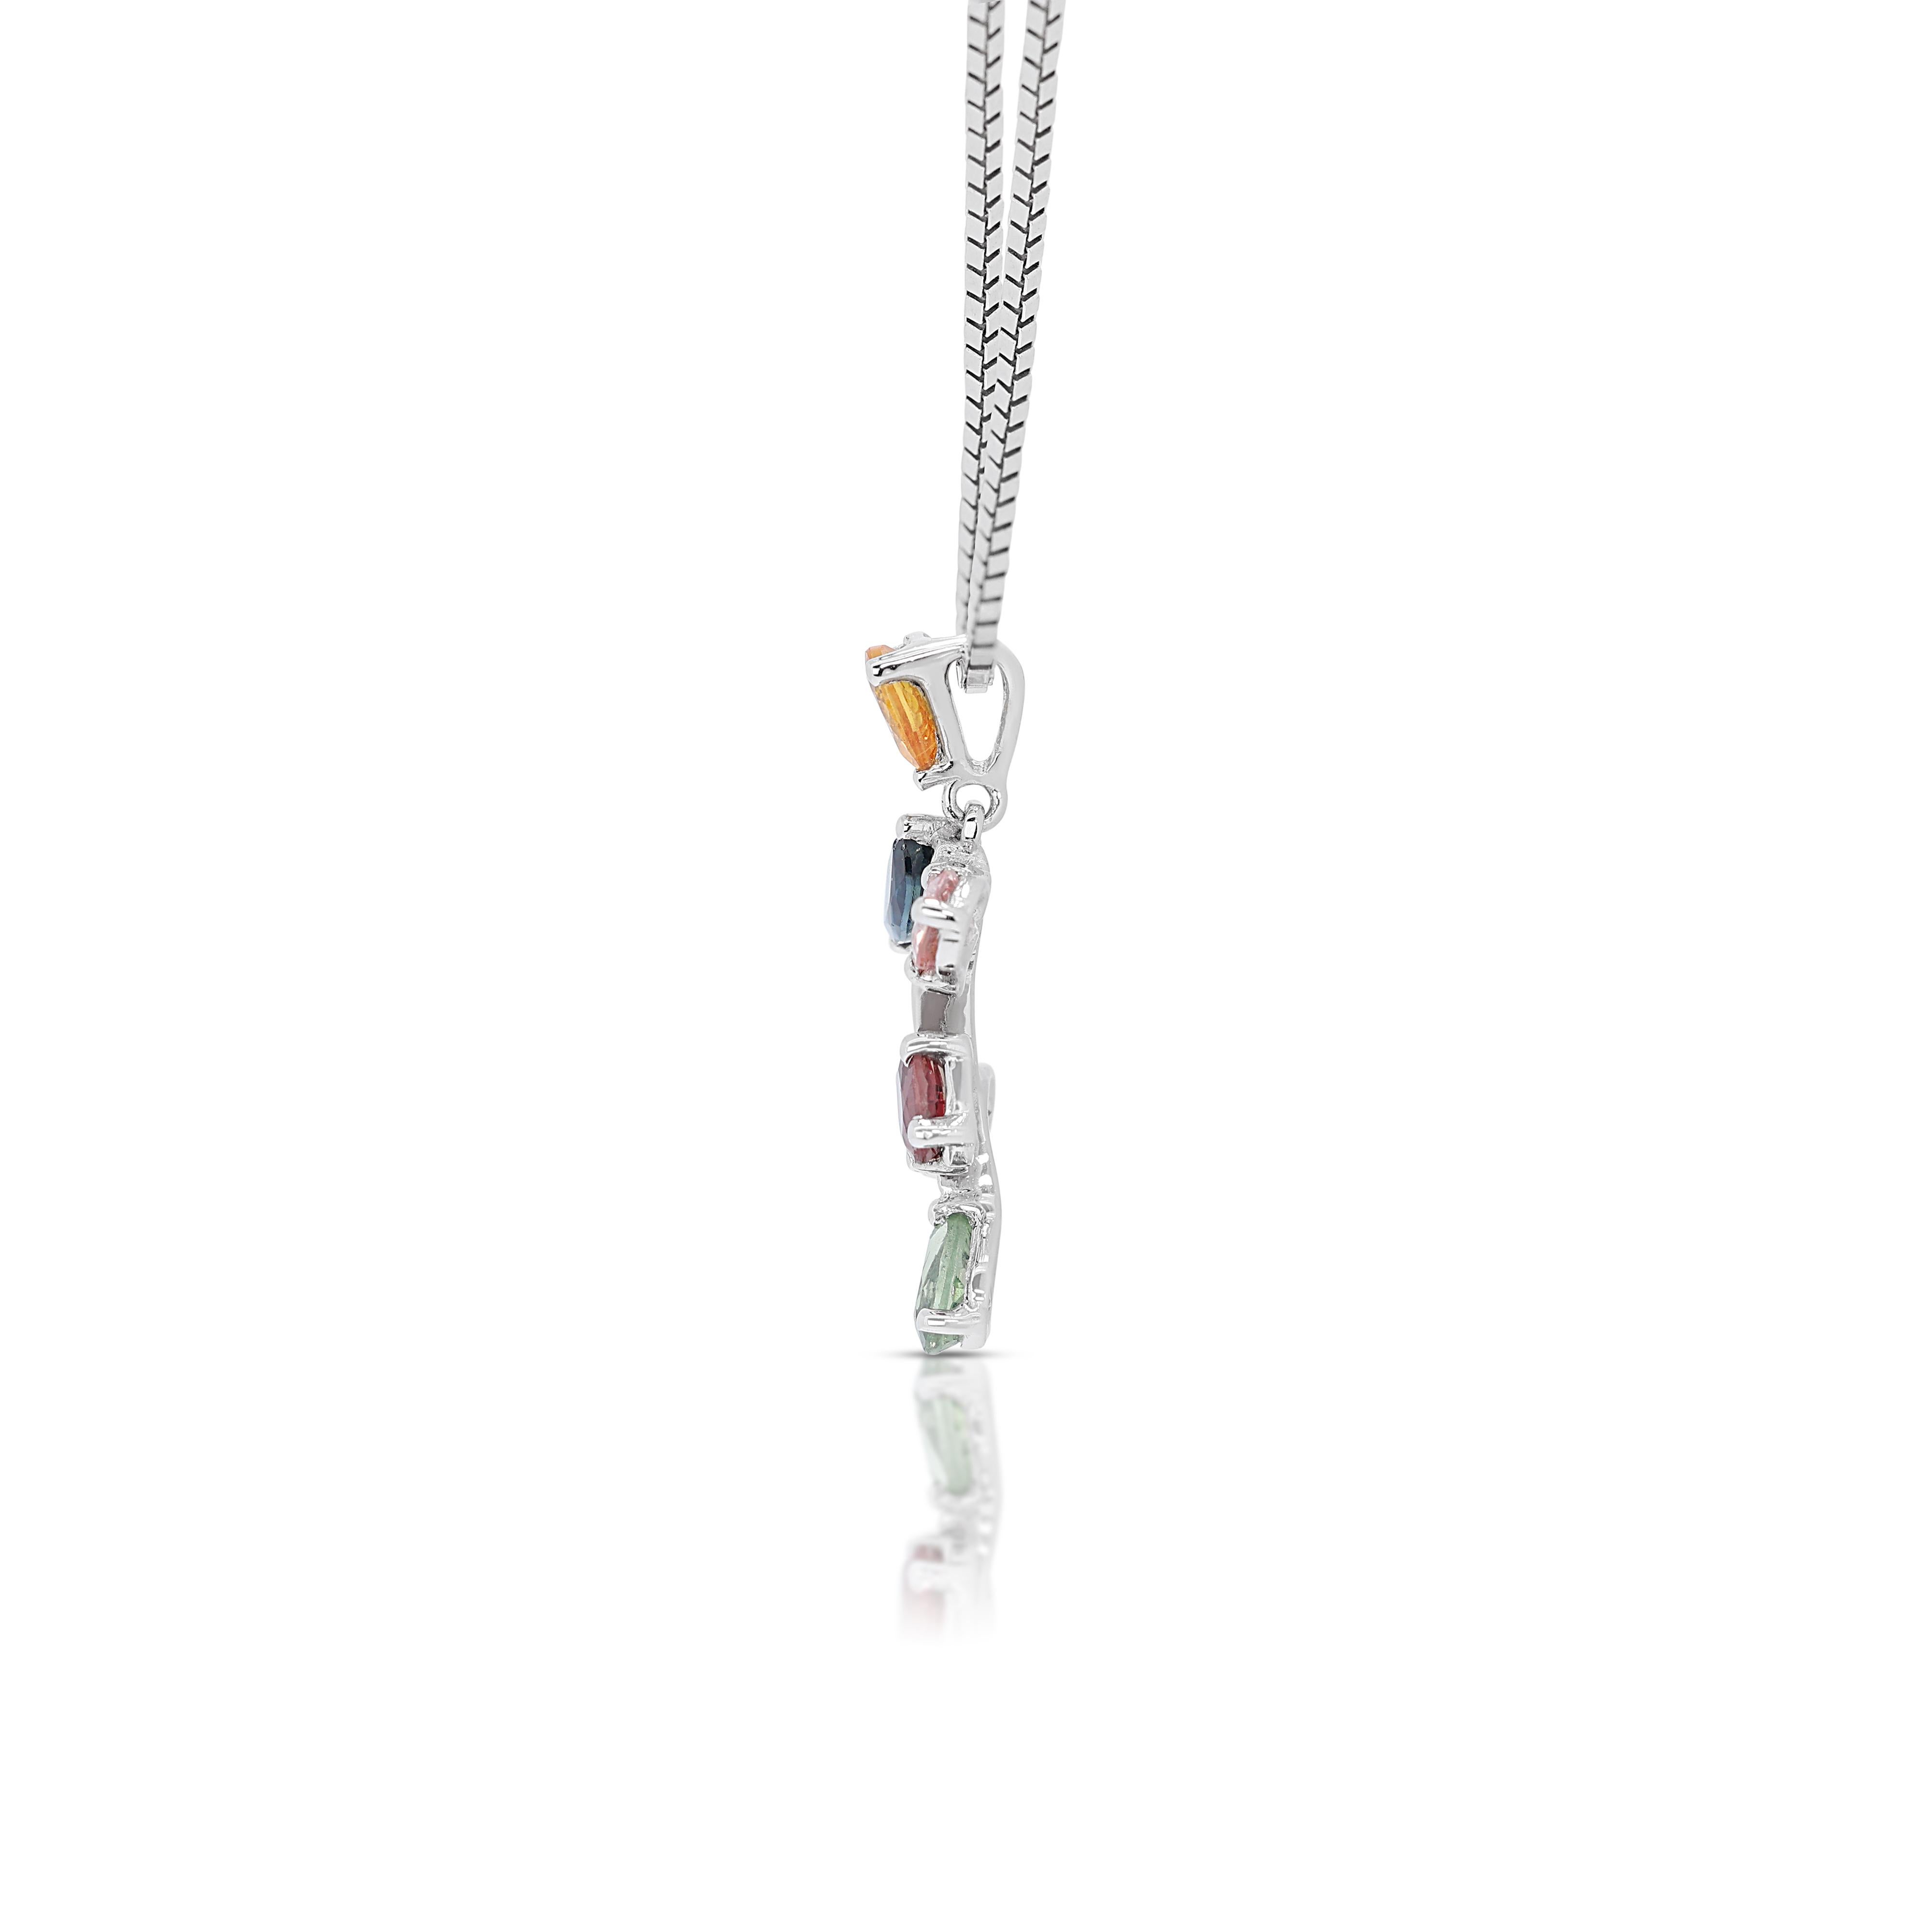 Captivating 0.70ct Multi-Colored Sapphires Pendant - (Chain Not Included) For Sale 1